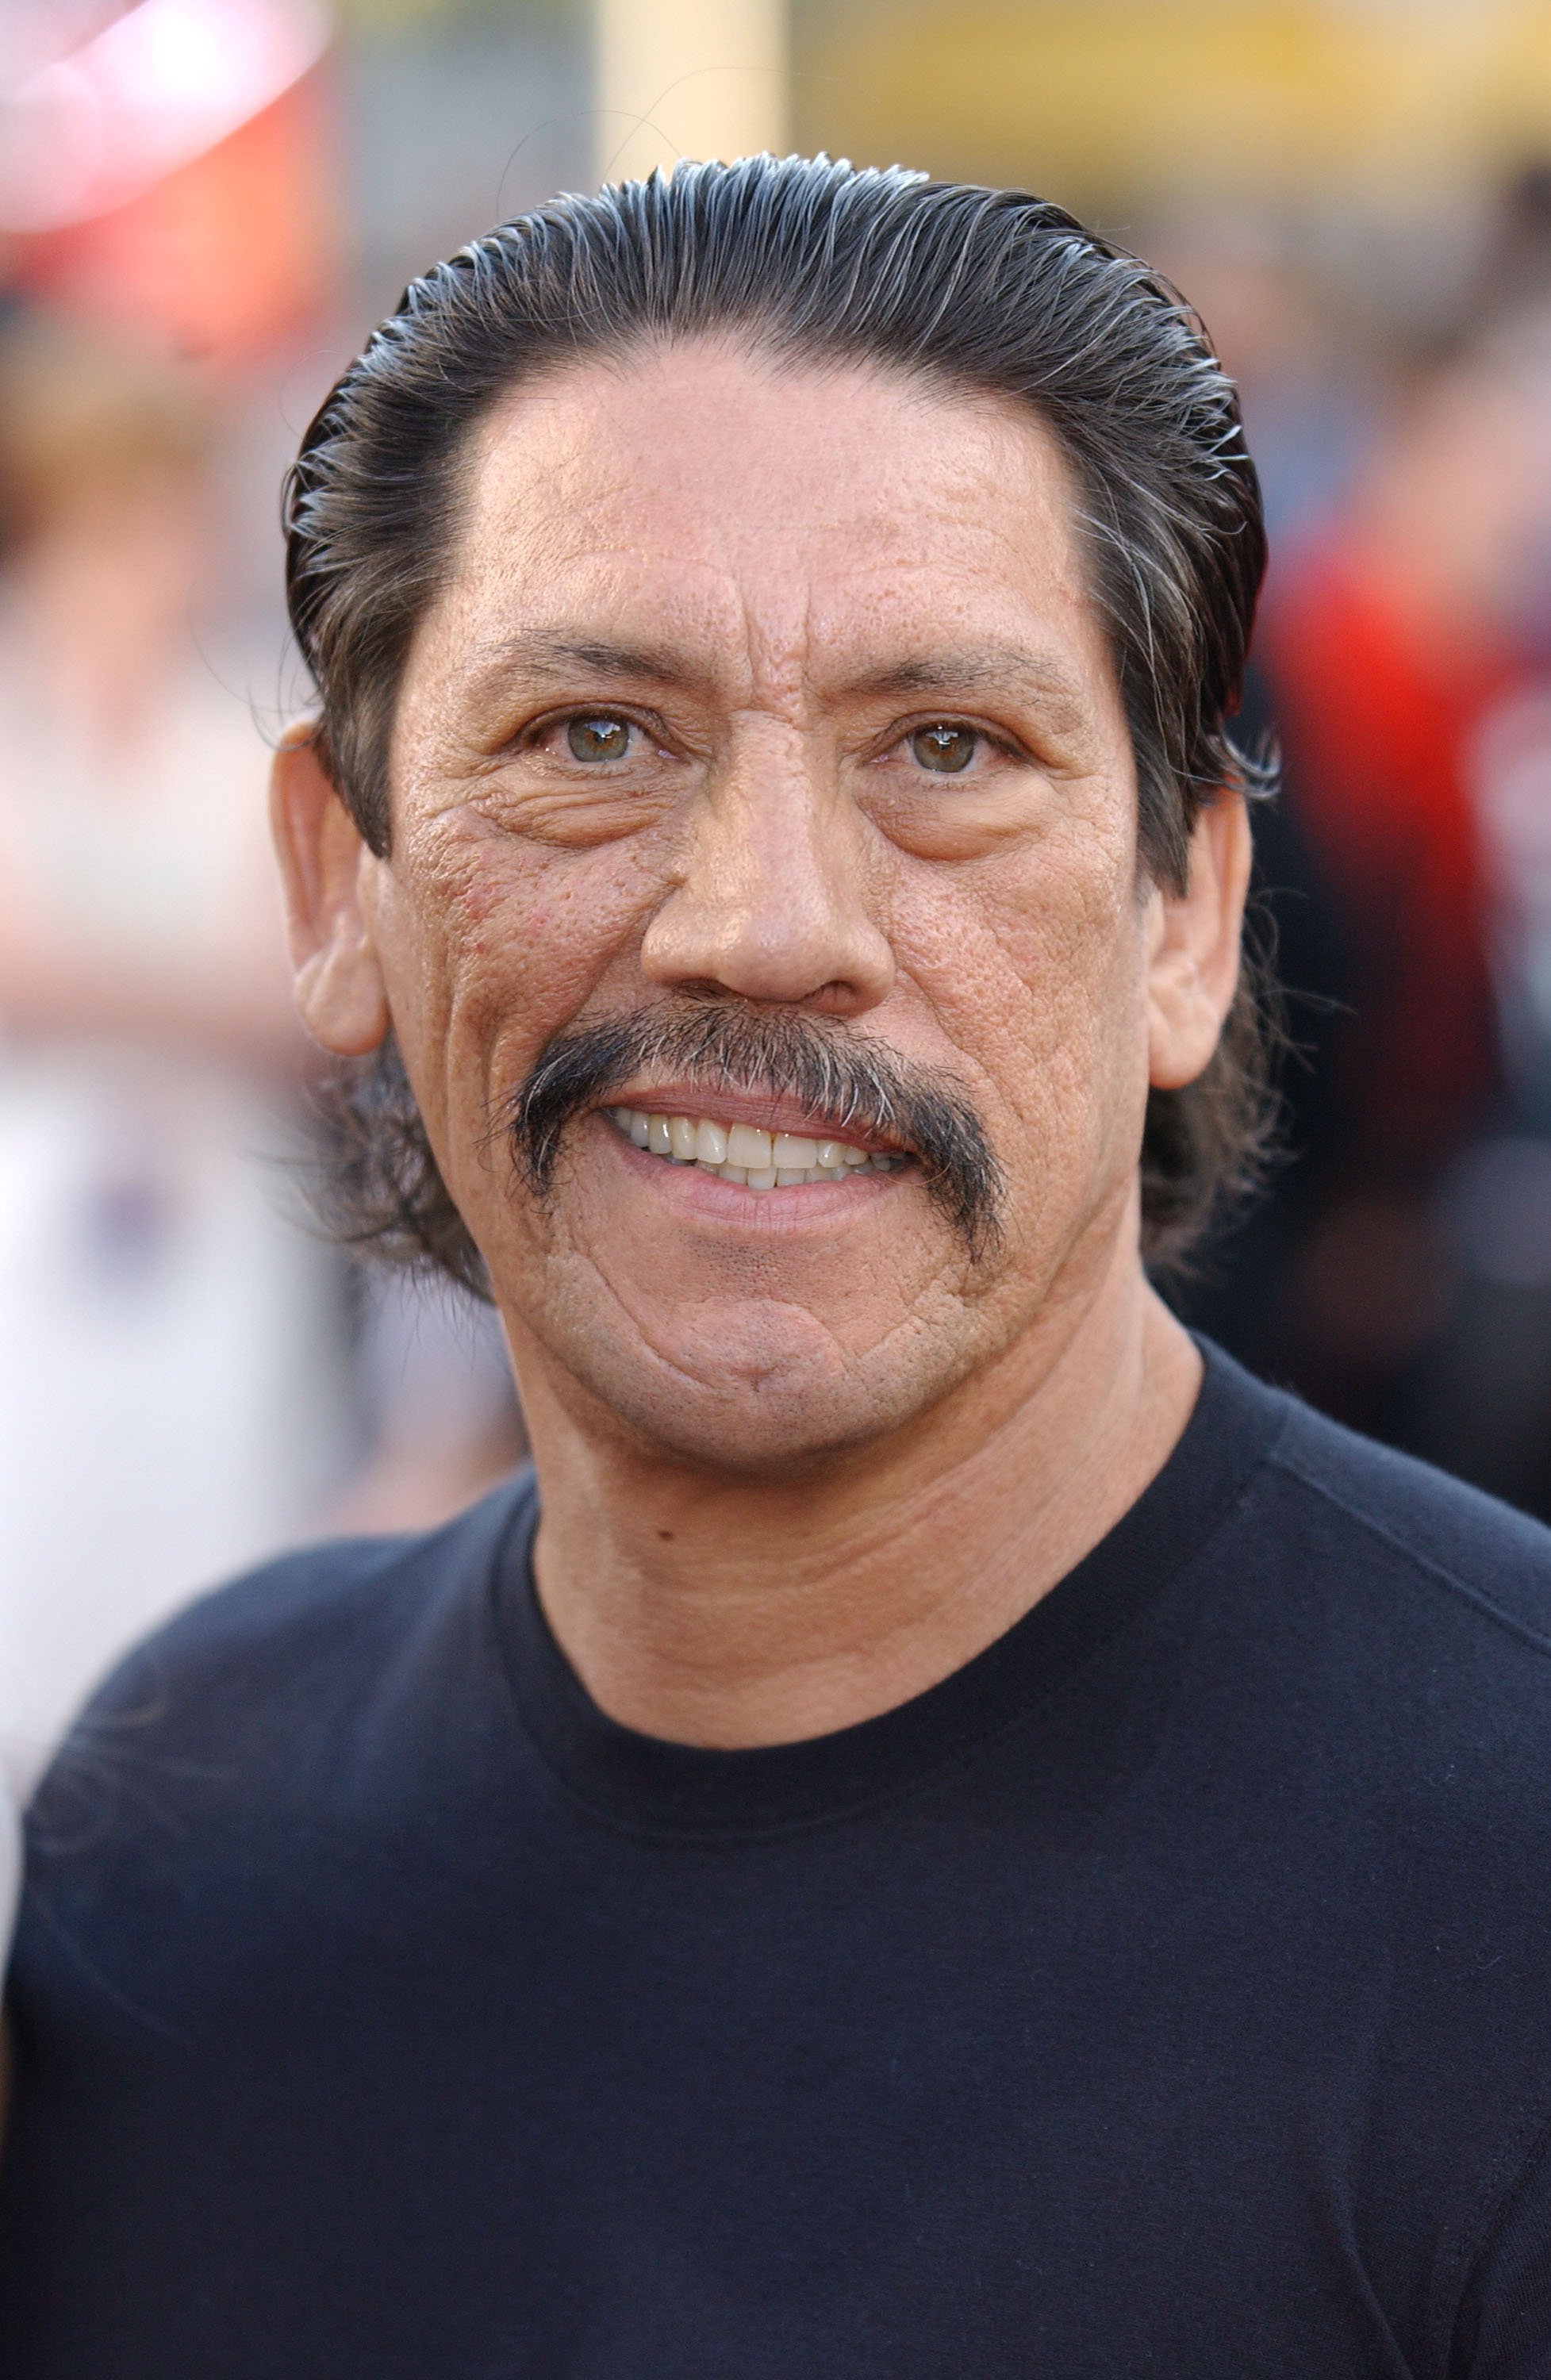 Actor Danny Trejo attends the premiere of "XXX" at the Mann Village and Bruin Theatres August 5, 2002 in Westwood, California. | Source: Getty Images